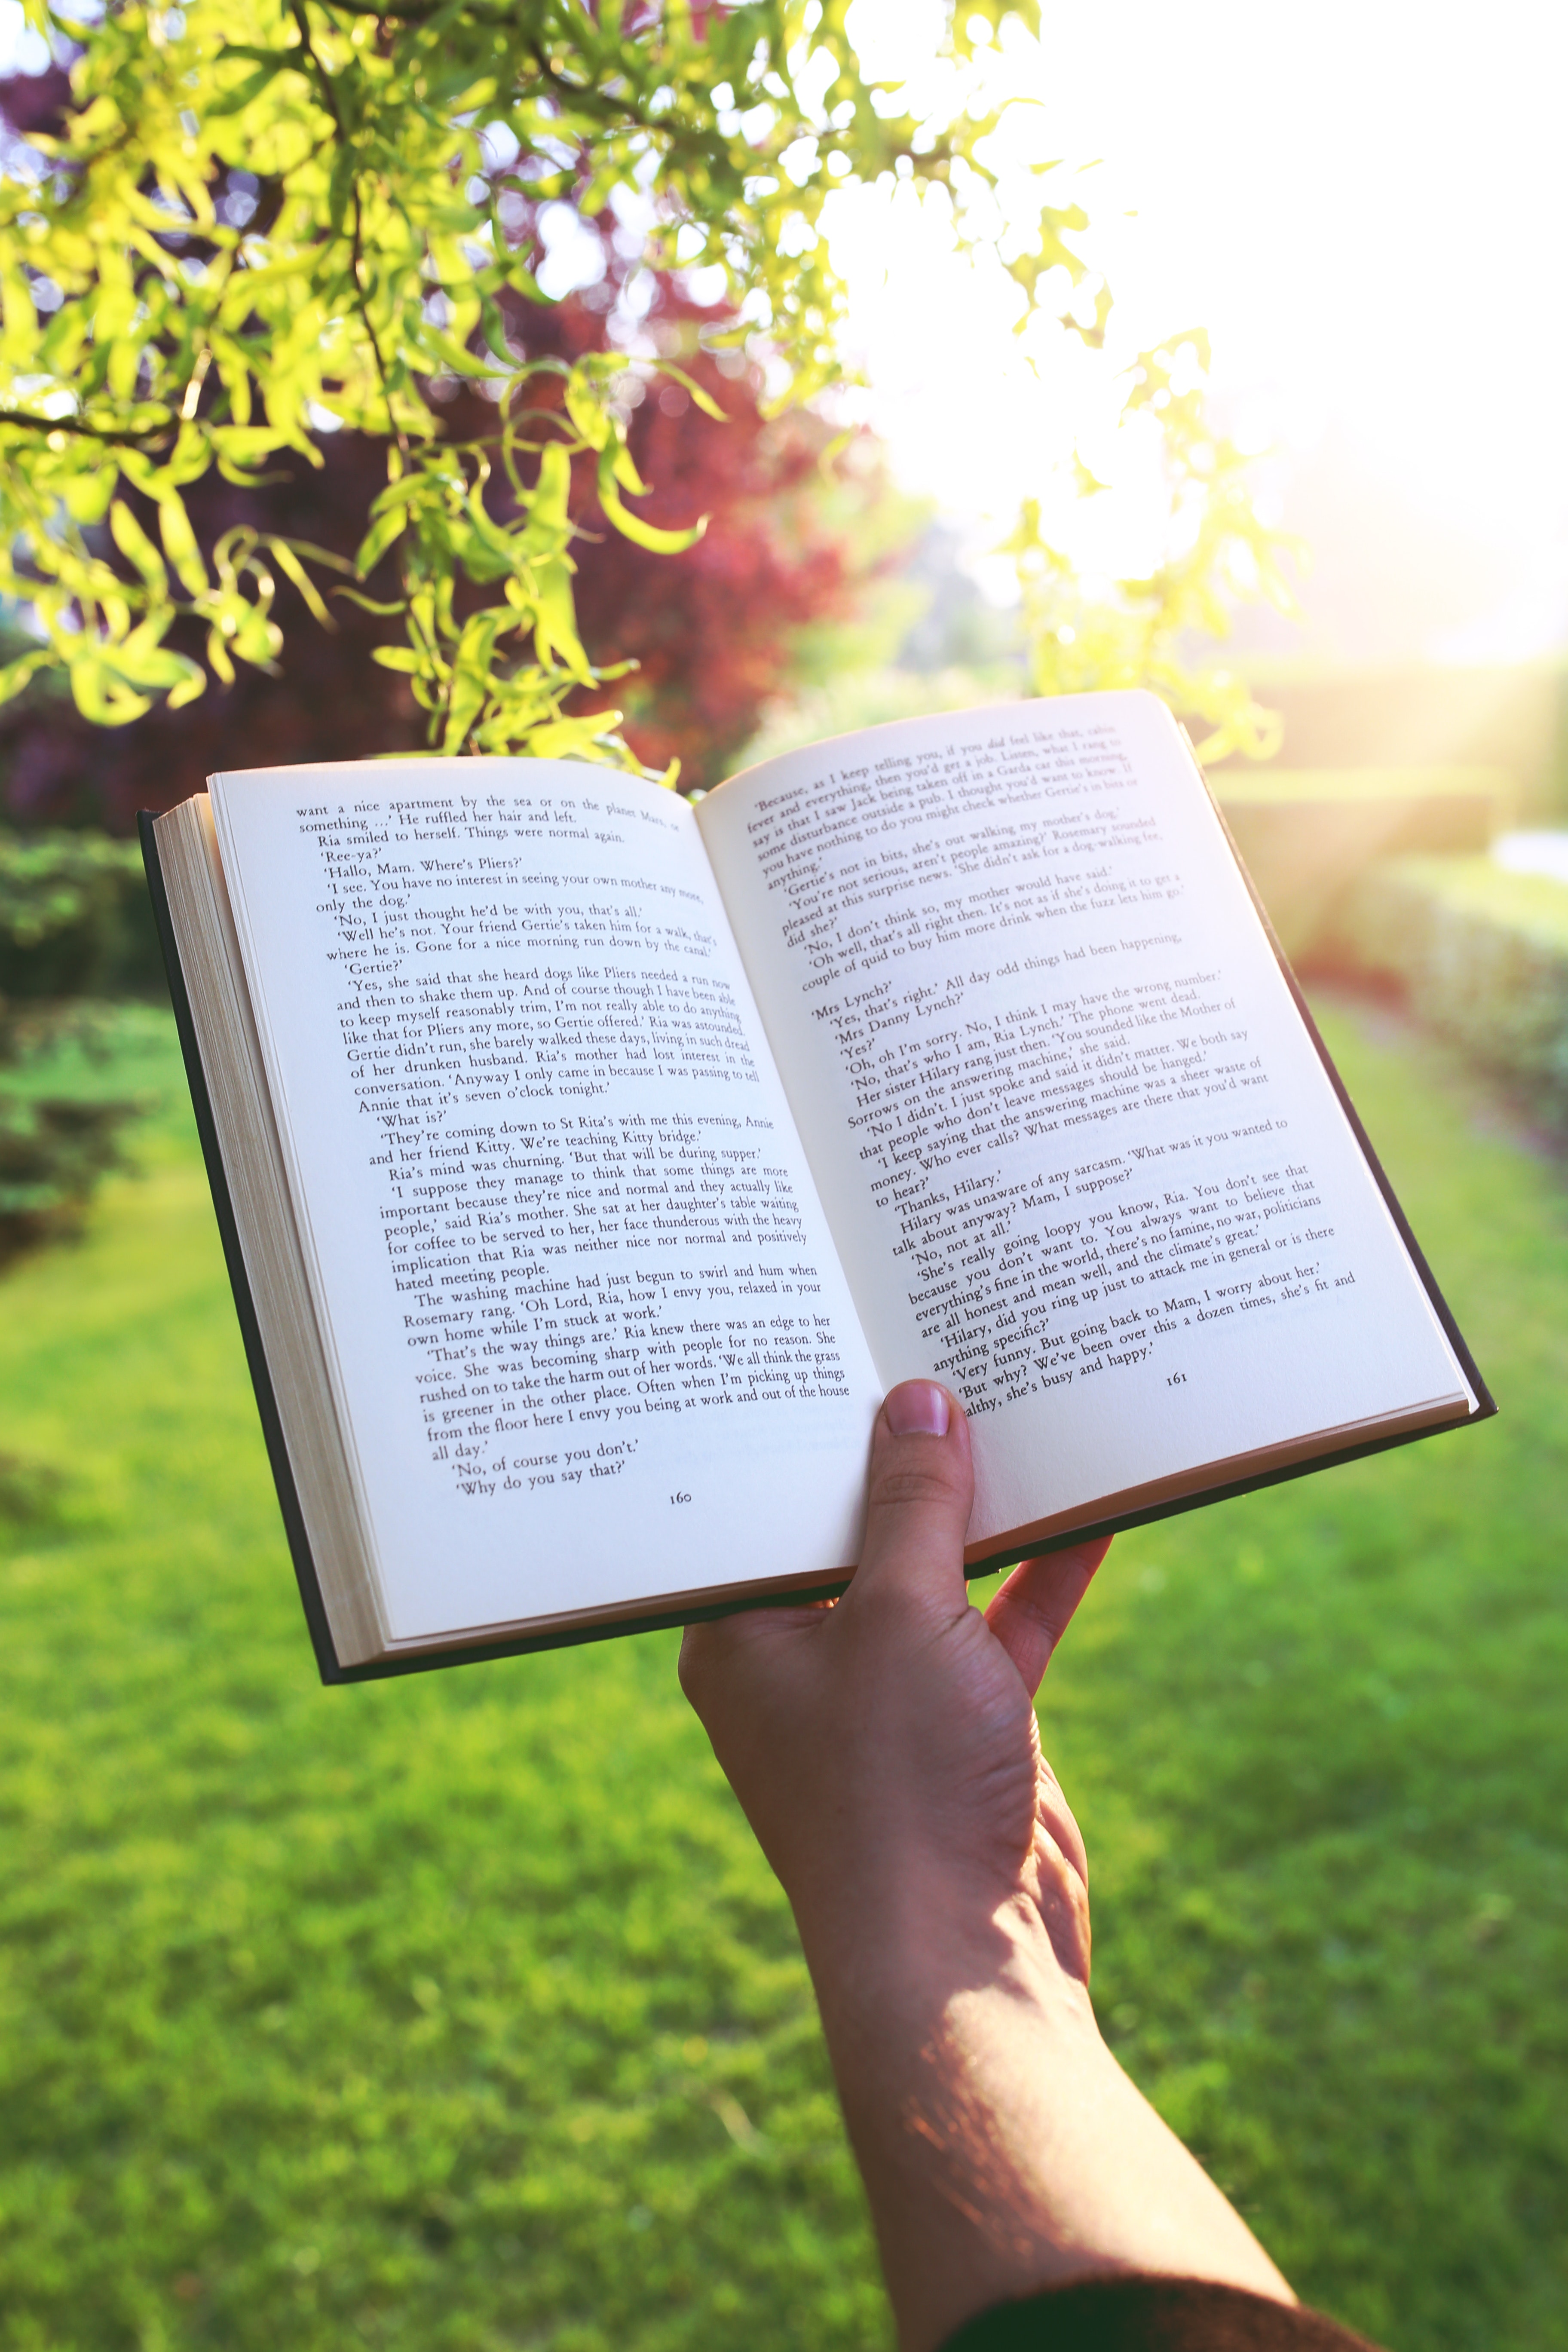 Book in the hand, Arm, Book, Garden, Hand, HQ Photo